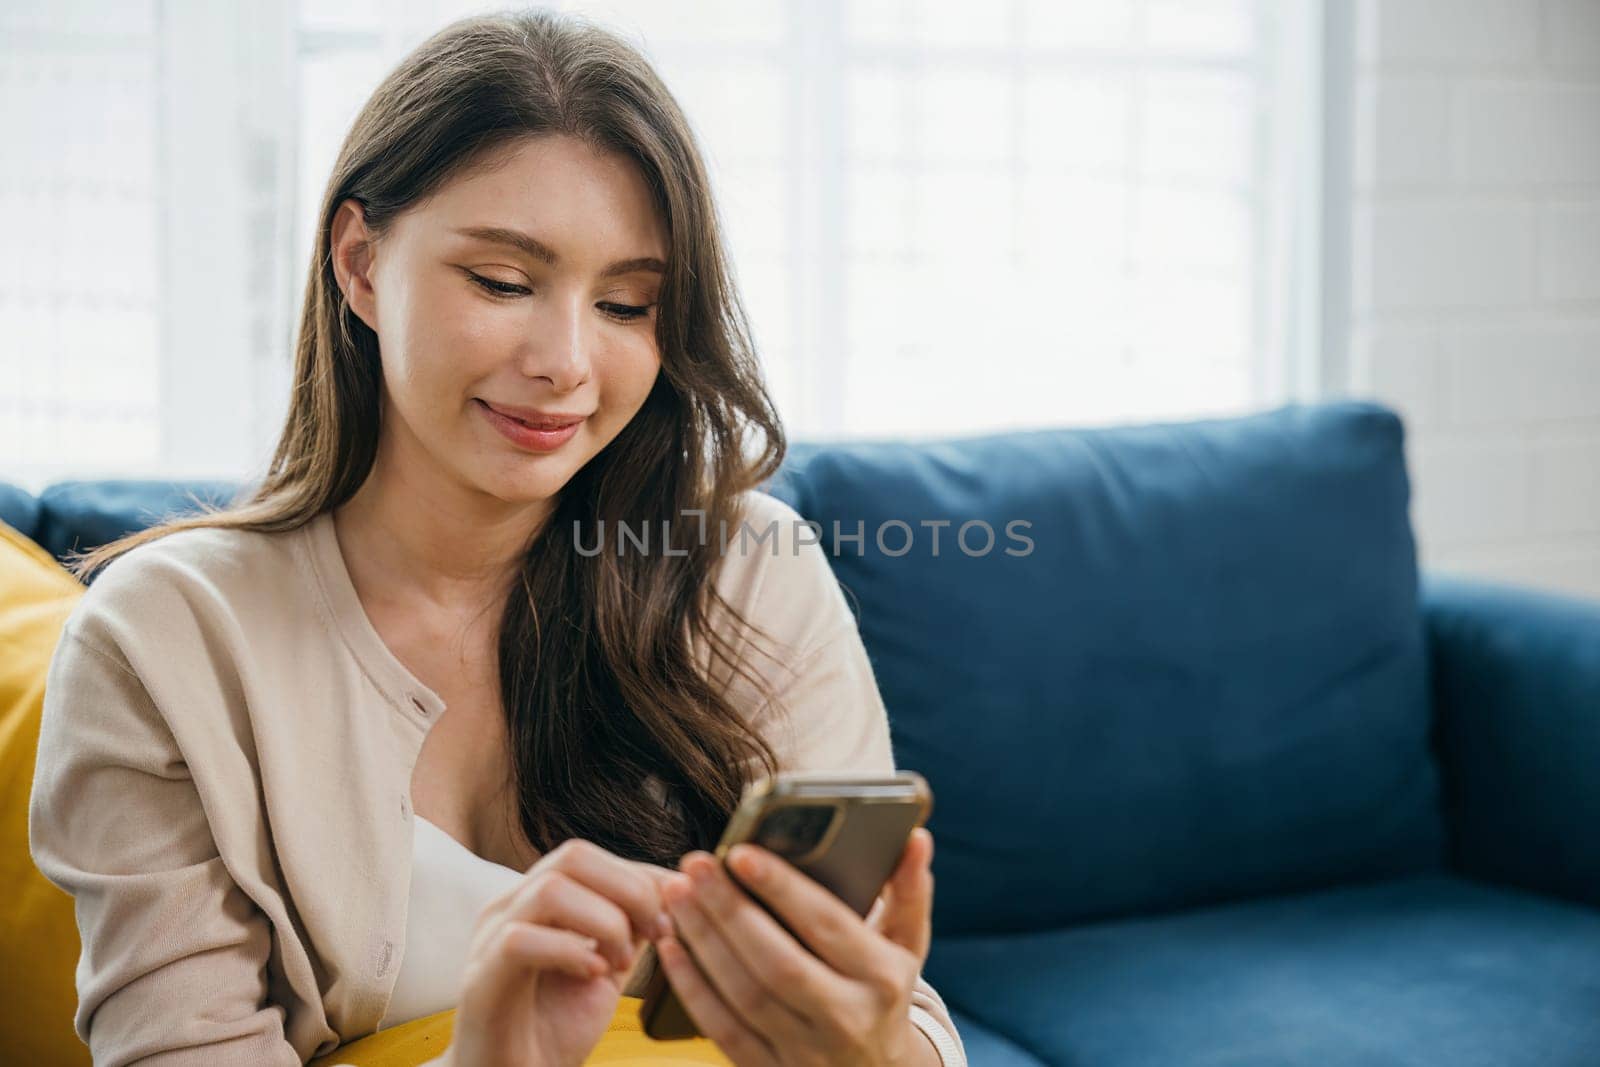 Seated comfortably a woman on a sofa talks on her phone typing messages. Amid home relaxation she finds success in communication and technology displaying a content smile. The woman is relaxing.